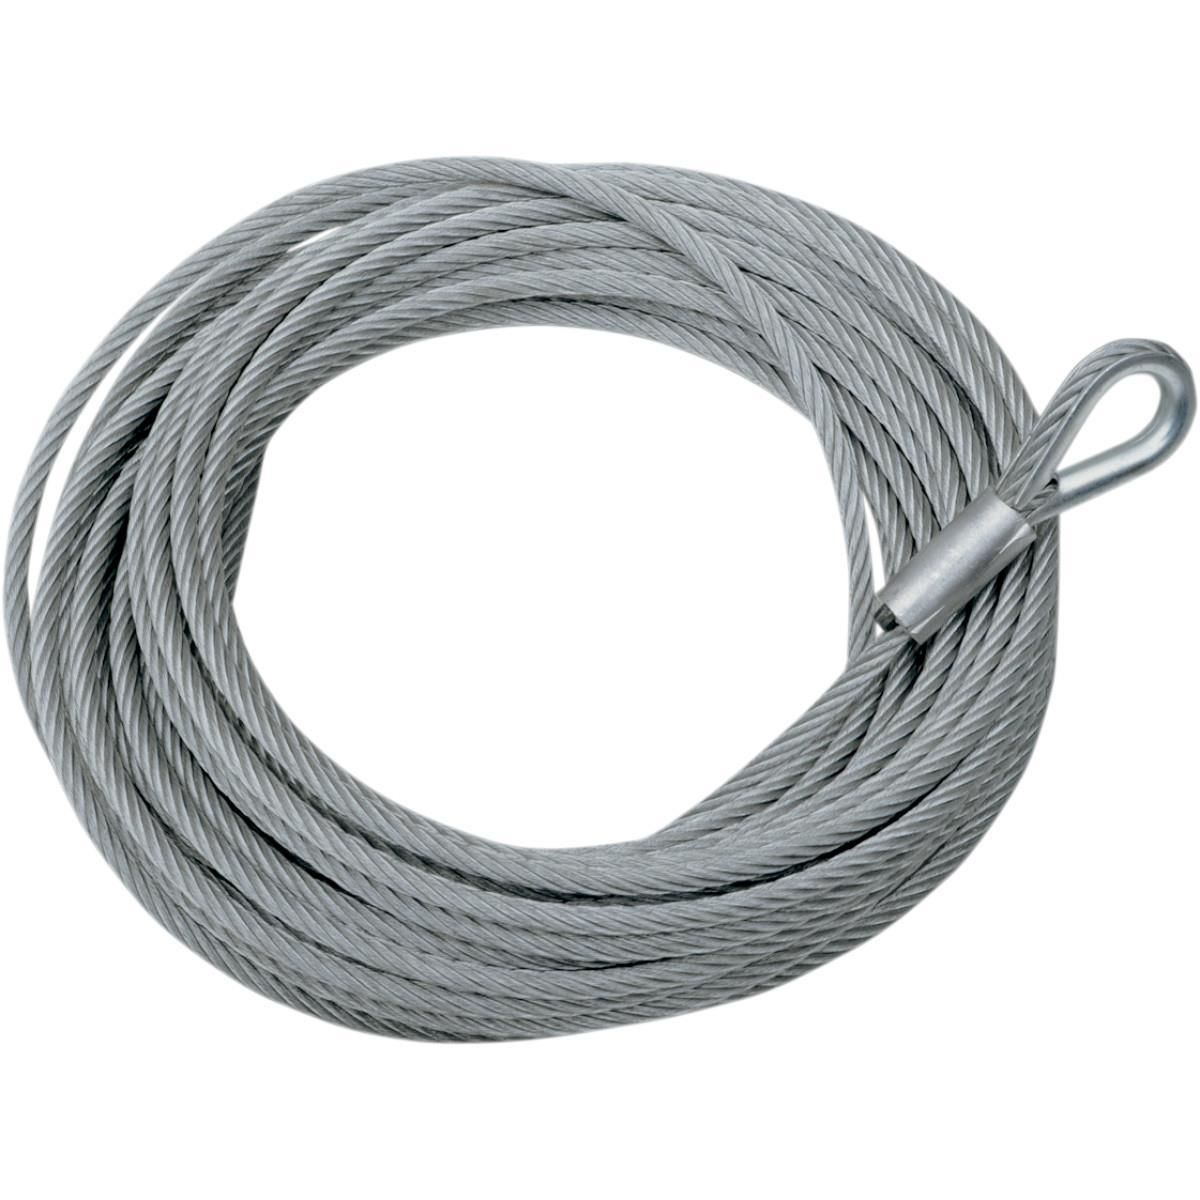 322P-MOOSE-UTILI-45050441 Wire Rope for 3700 lb. Winch